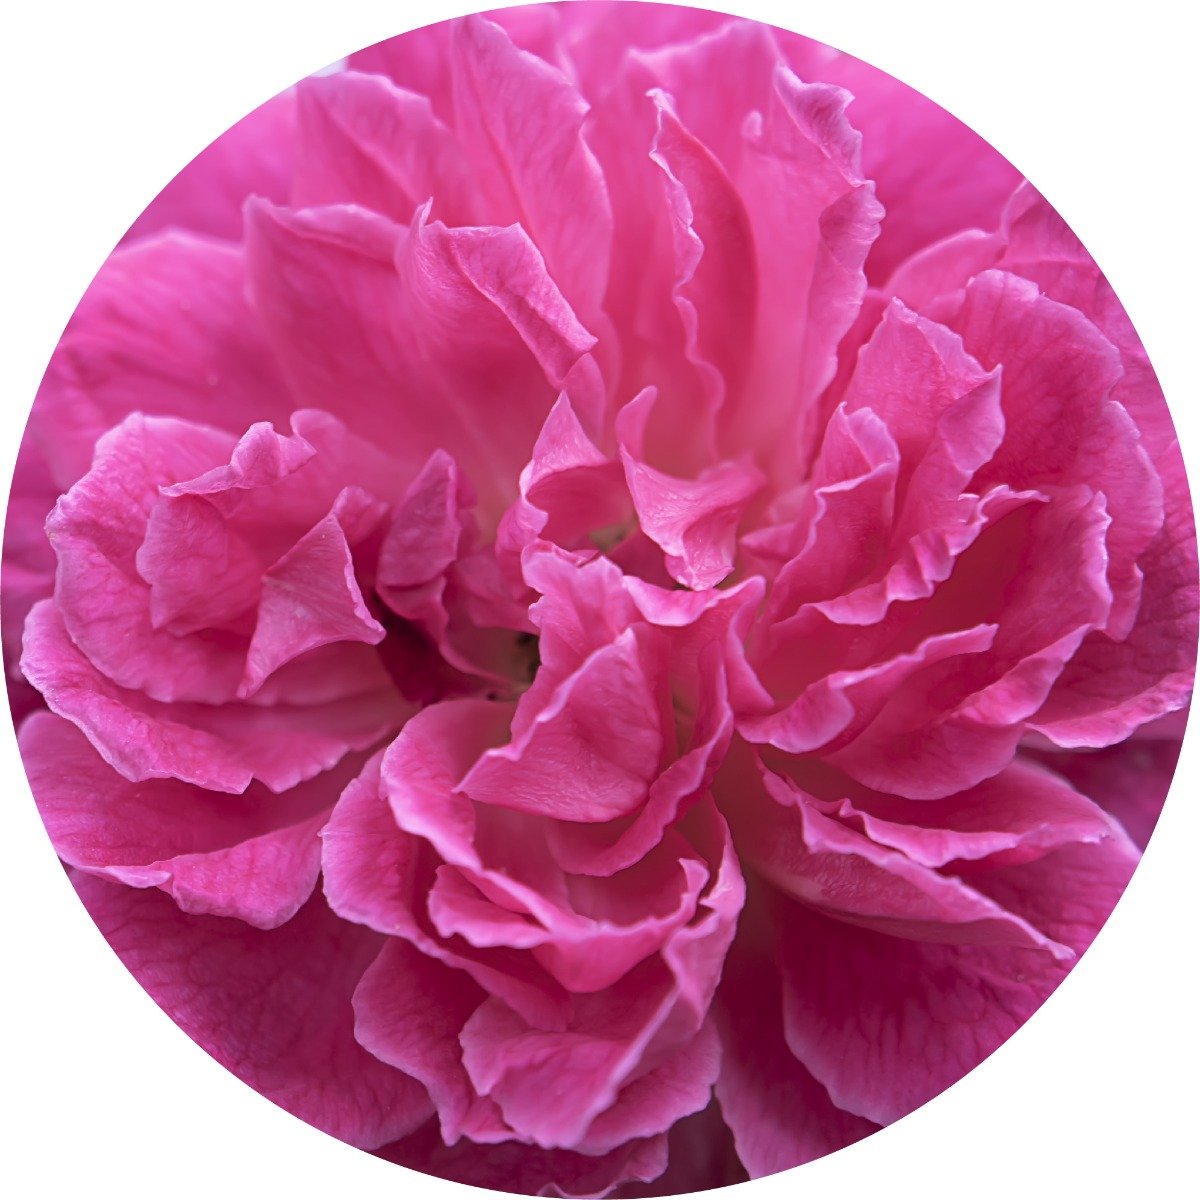 Peony Essential Oil | Heavenly Pure Oils